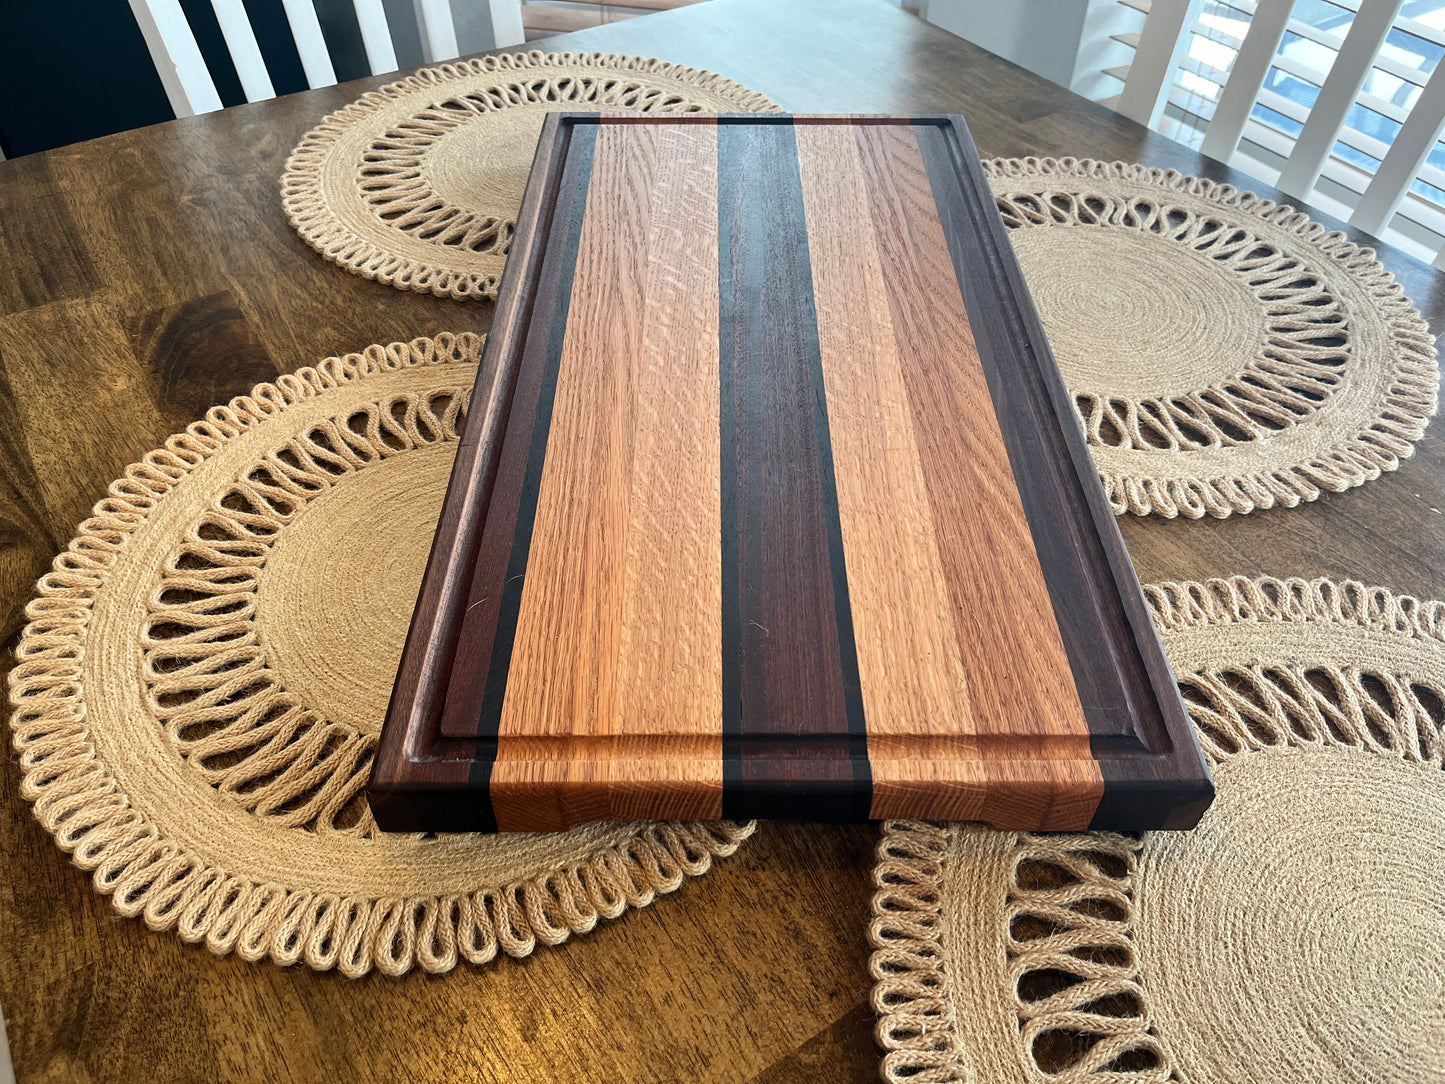 The “Ensign” Cutting Board